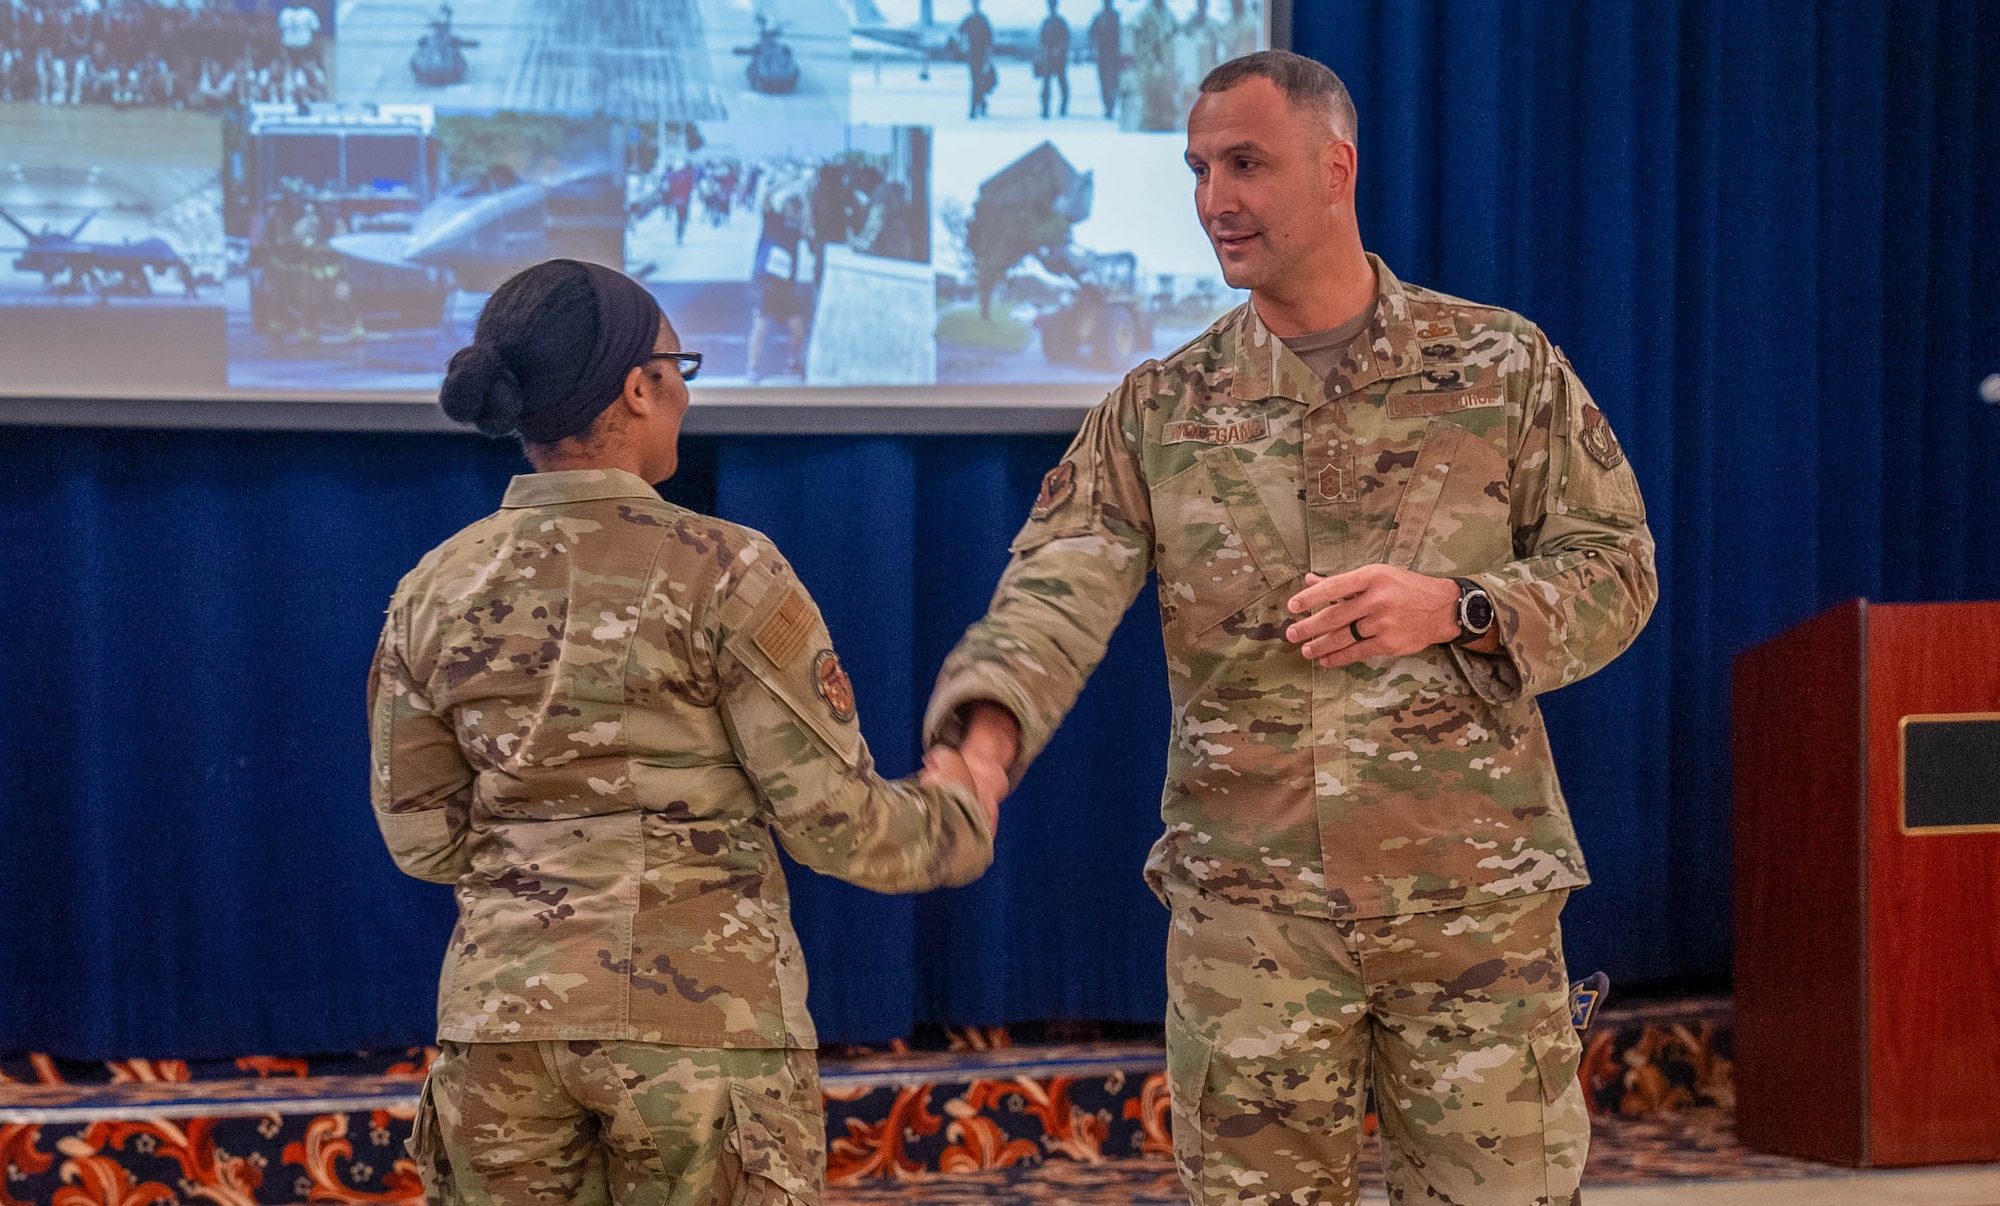 Two Airmen shake hands at a conference